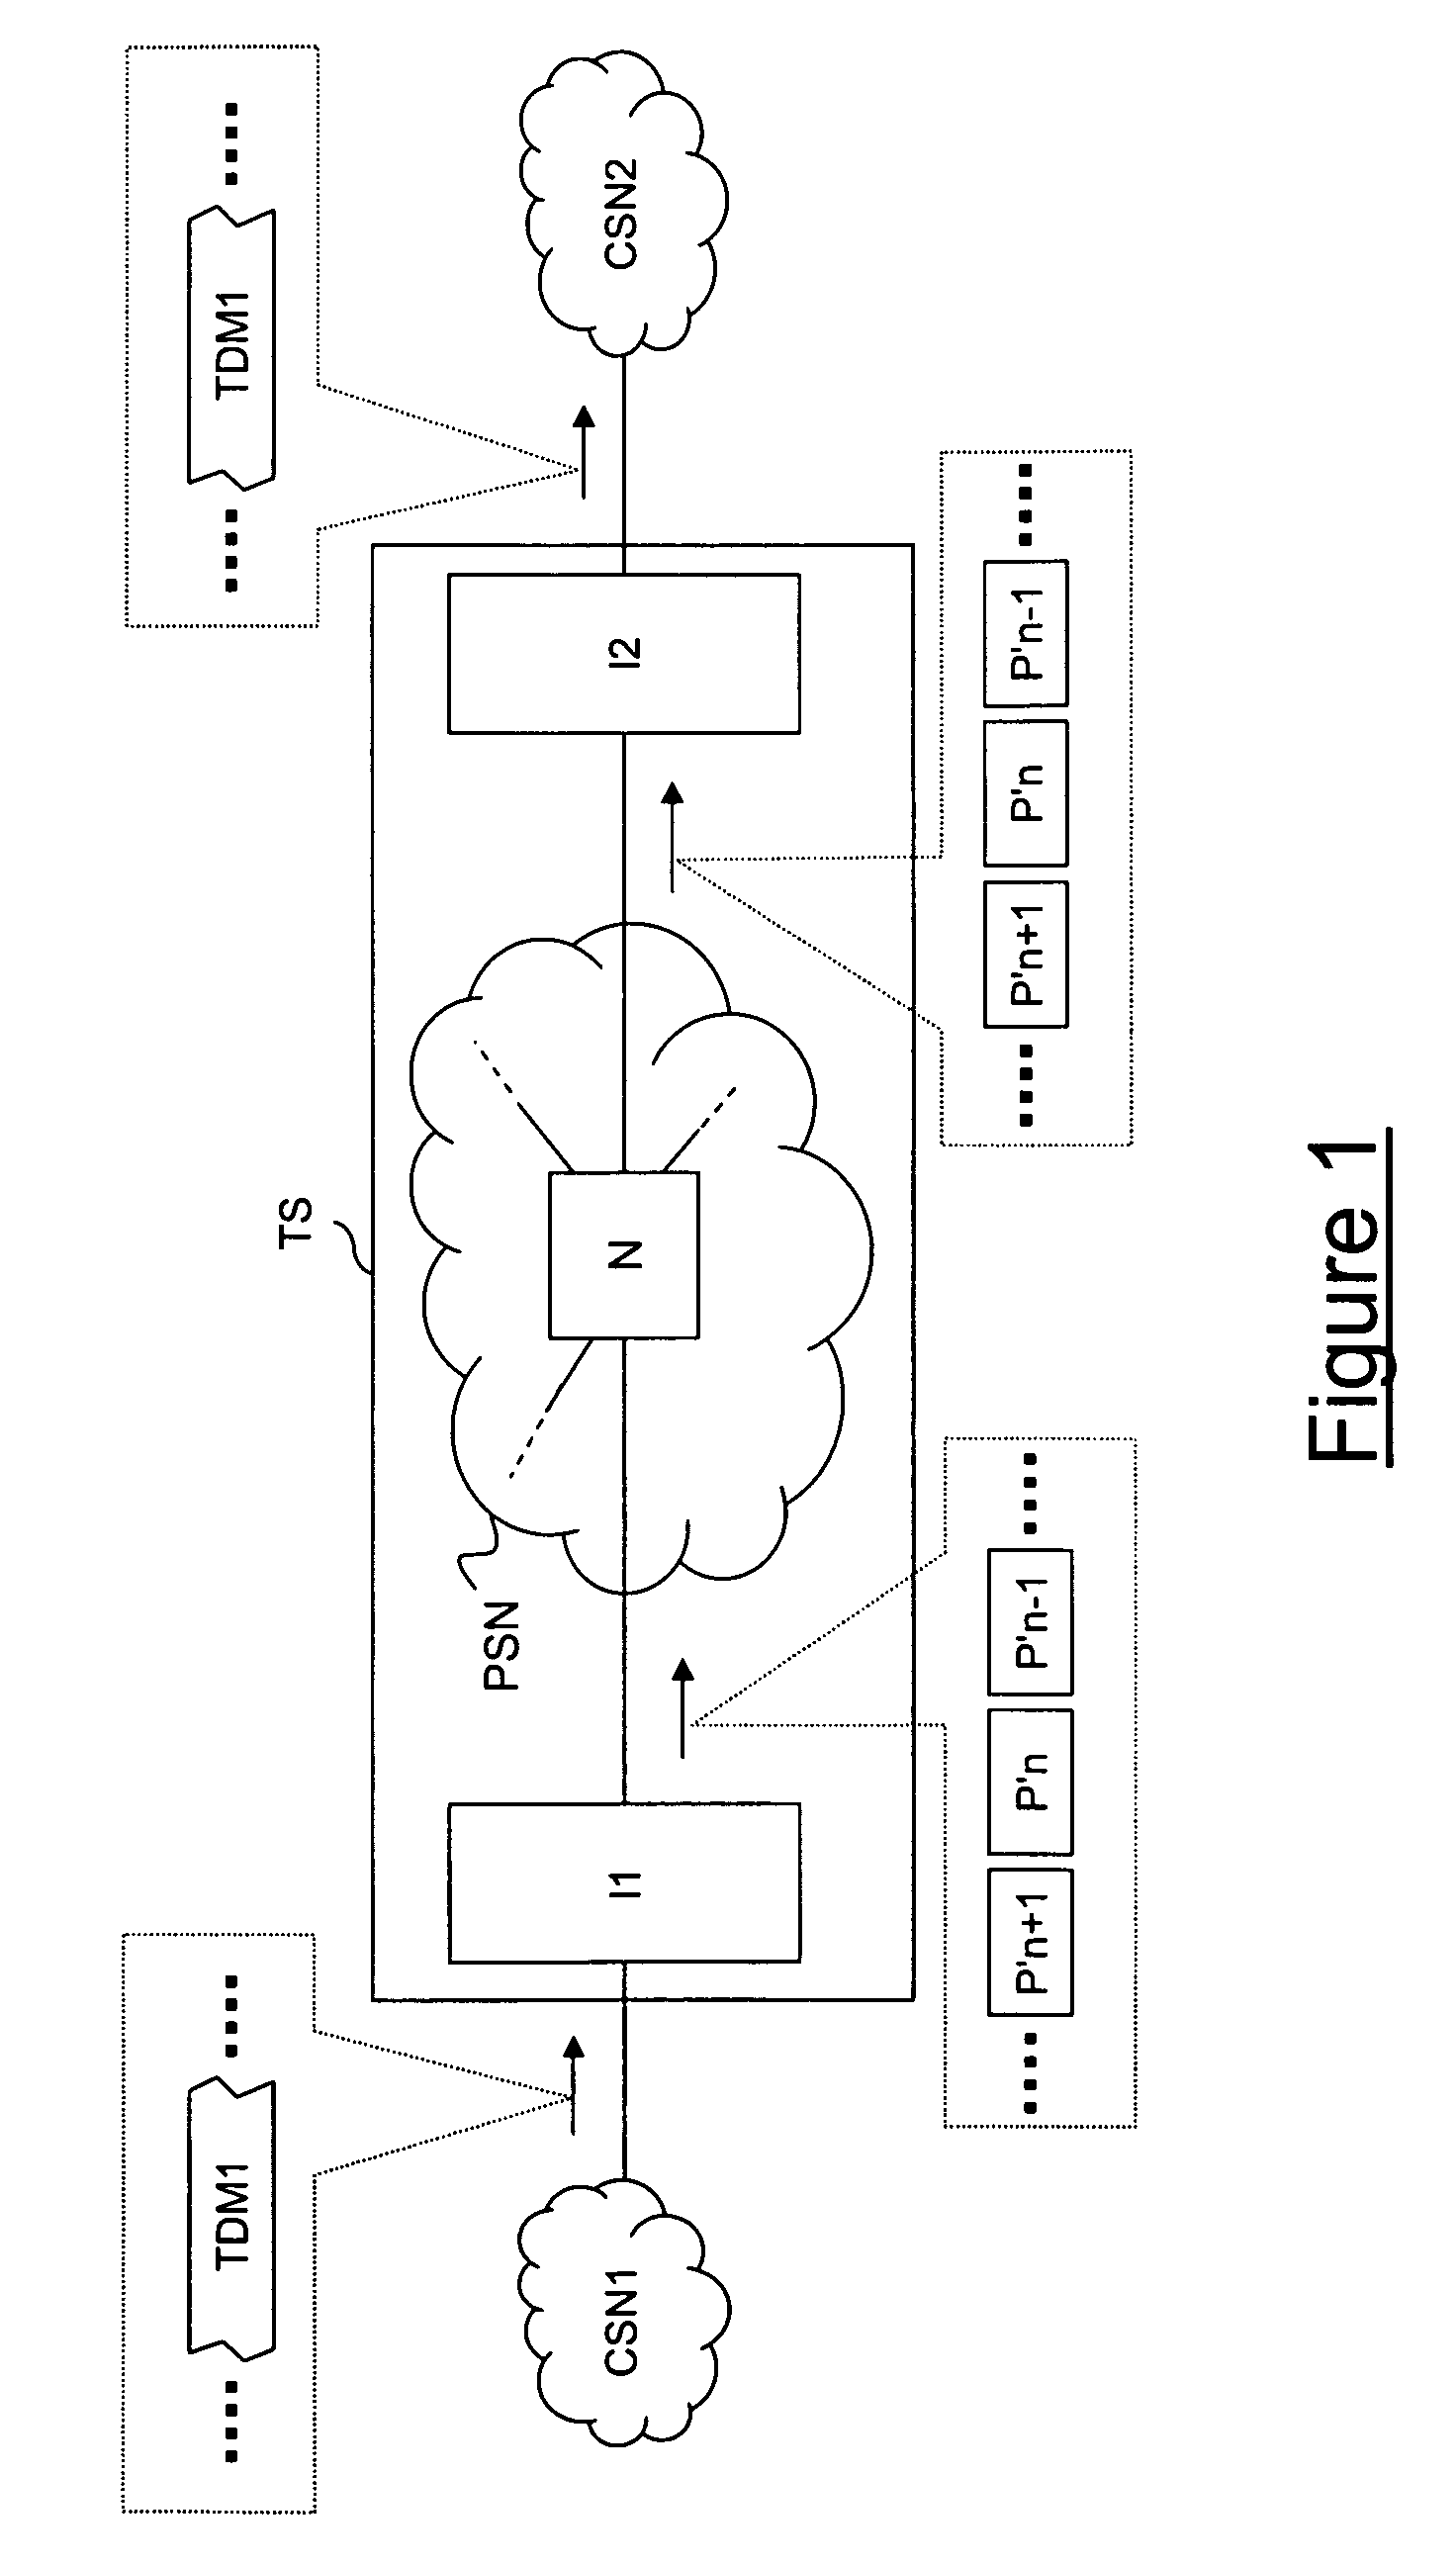 Circuit emulation service method and telecommunication system for implementing the method